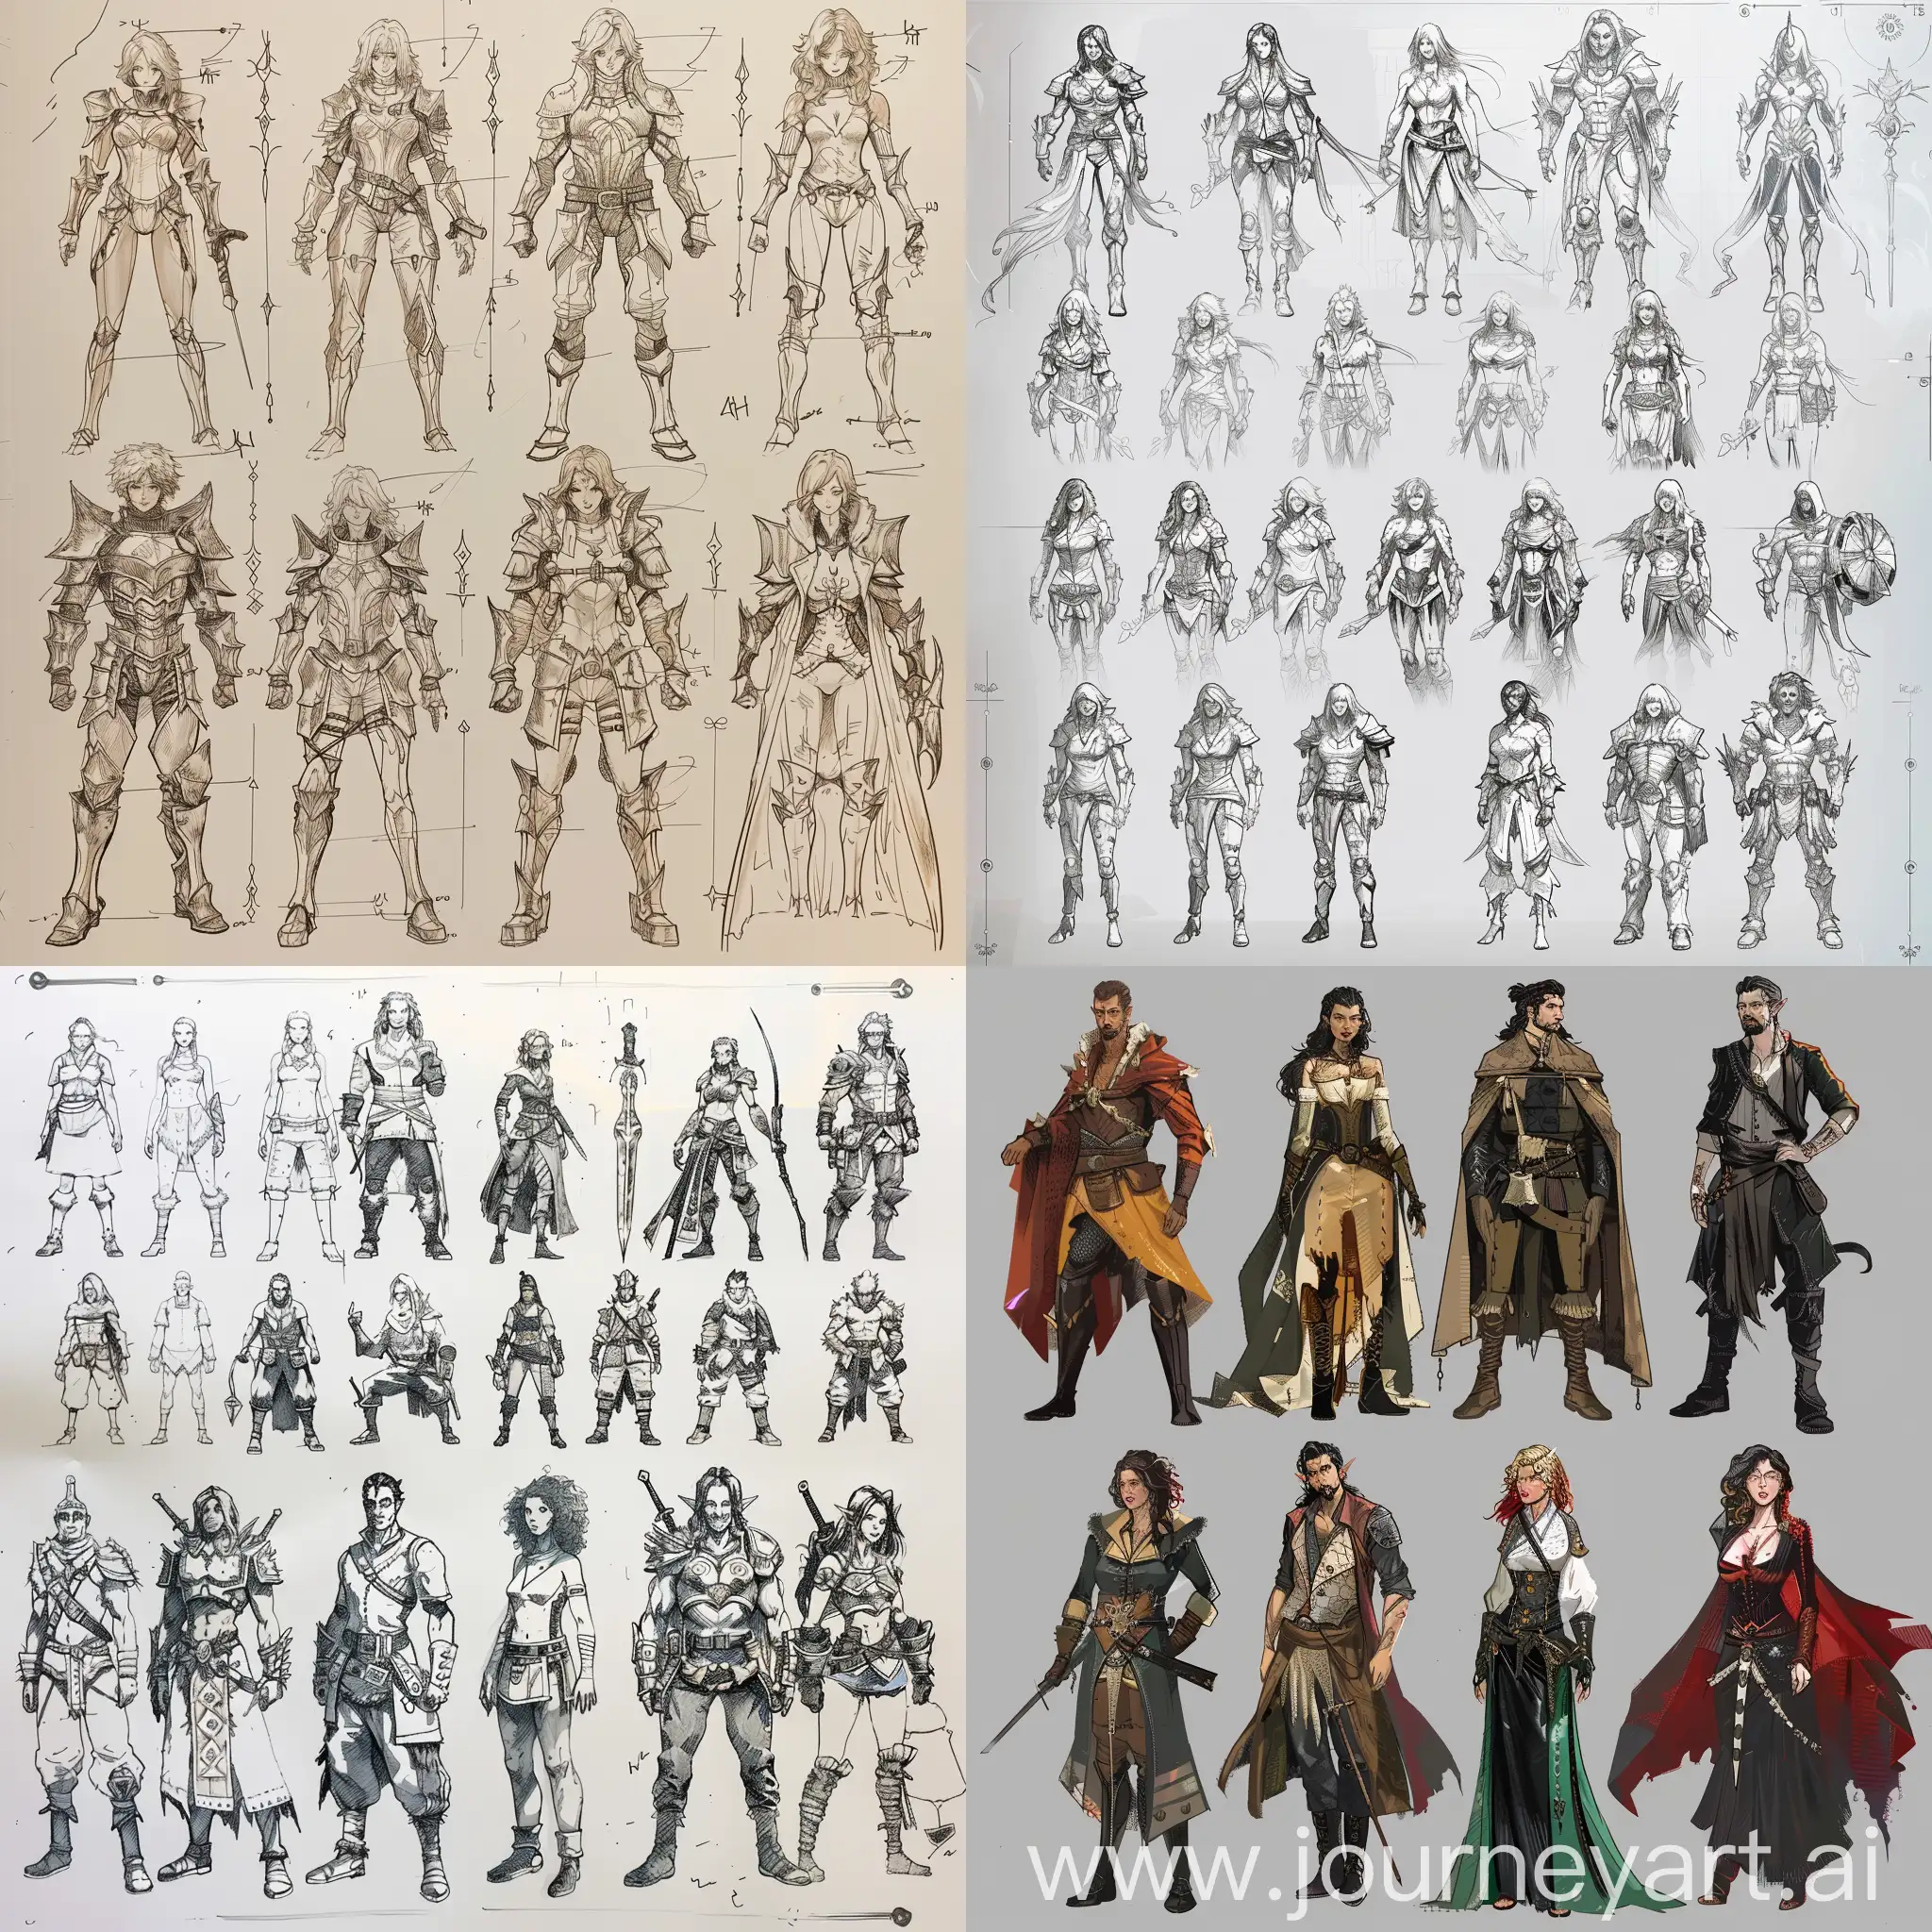  original characters multiple, full body character sheet. creative, different from each other, fantasy. 